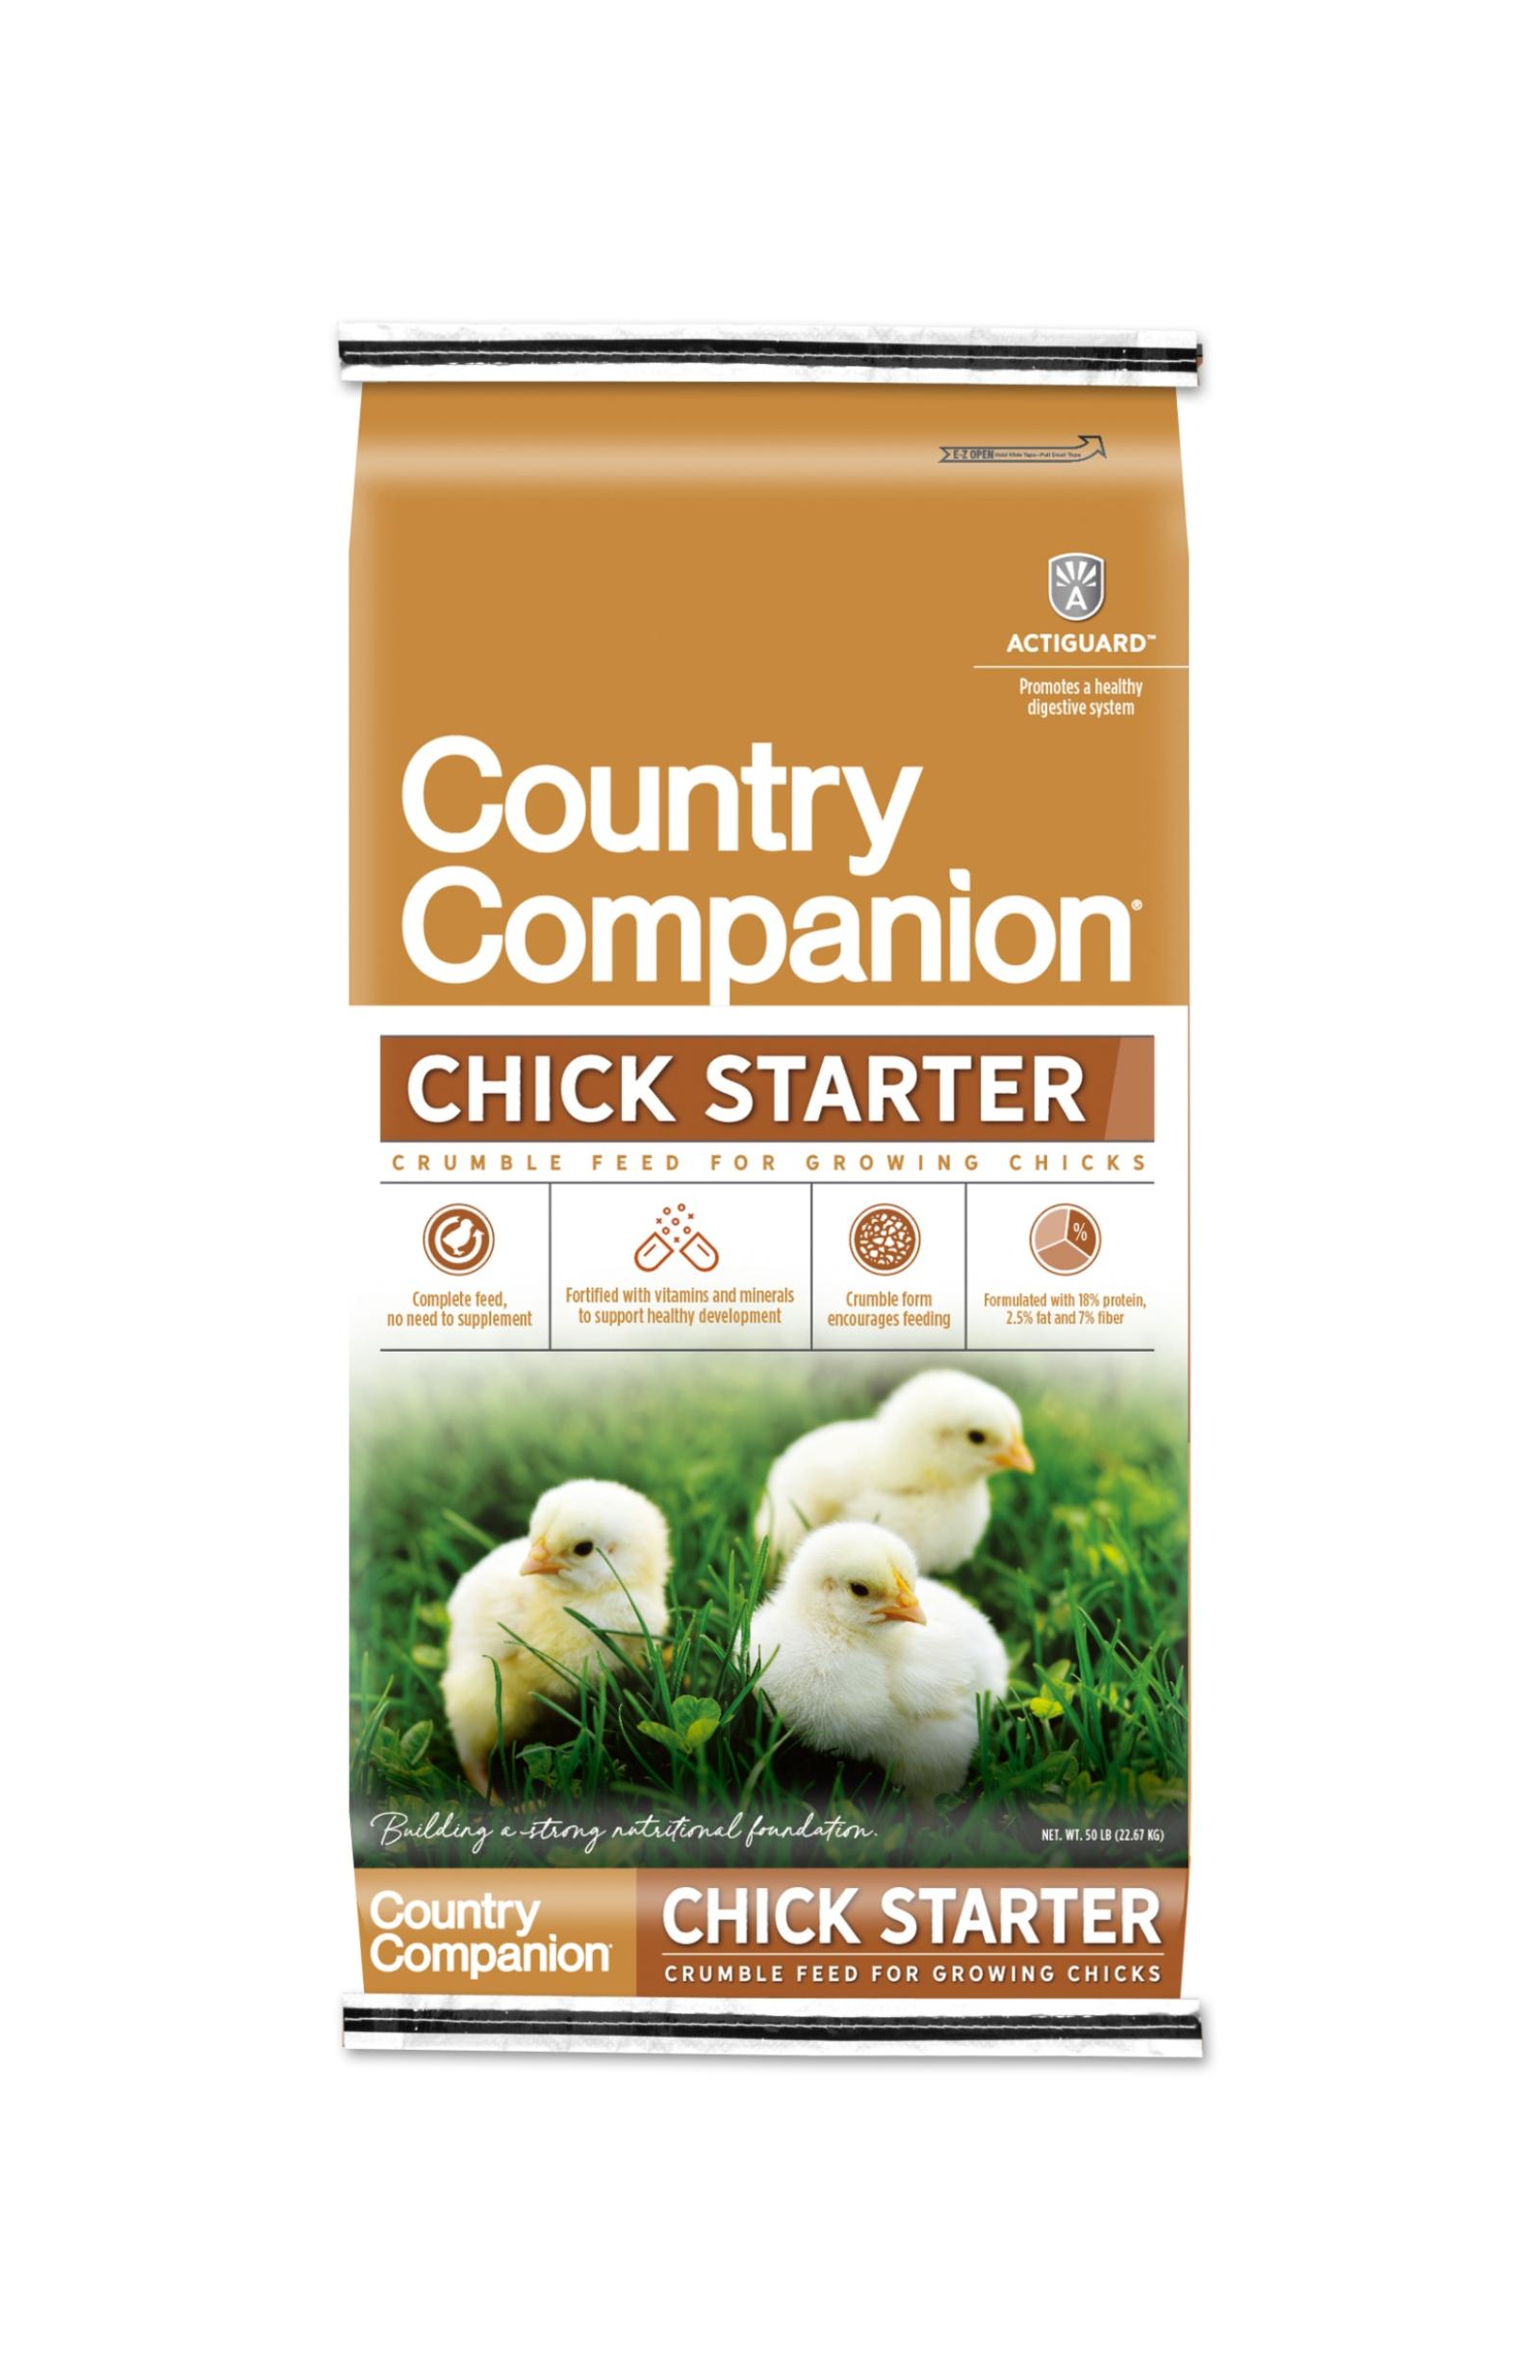 Country Companion Chick Starter Grower Feed Medicated